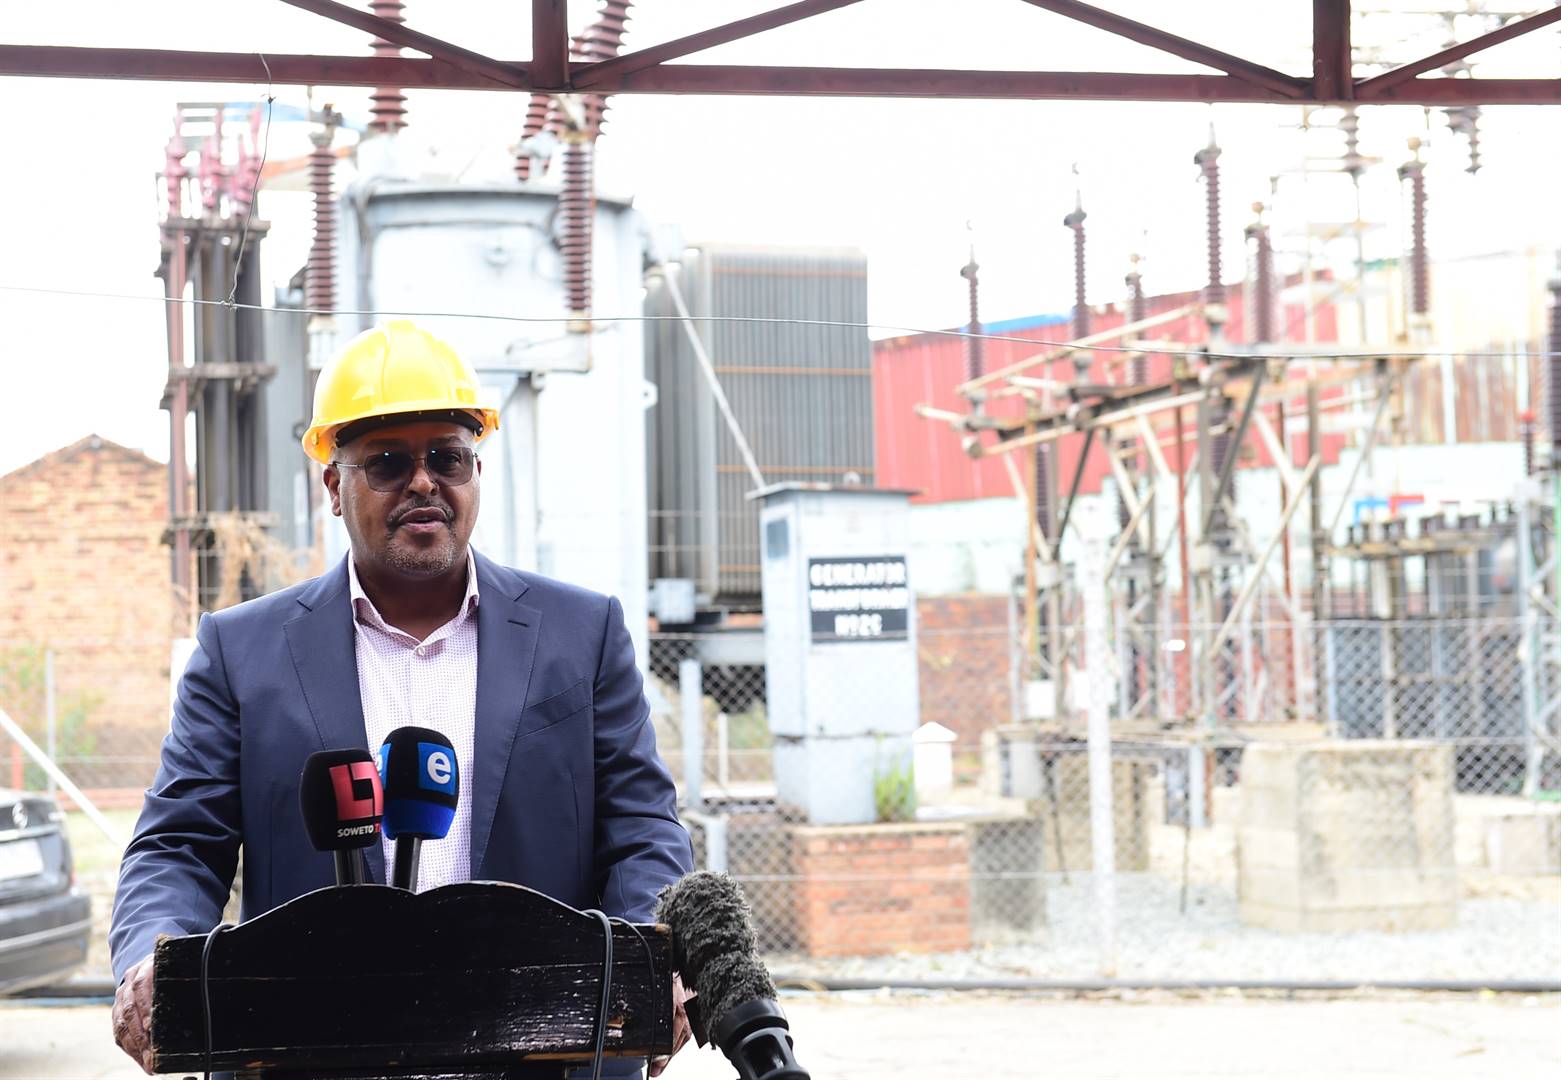 Joburg mayor Mpho Moerane said the city’s Energy Mix Plan is not an overnight development for electioneering as some suggest.                         Photo by Morapedi Mashashe